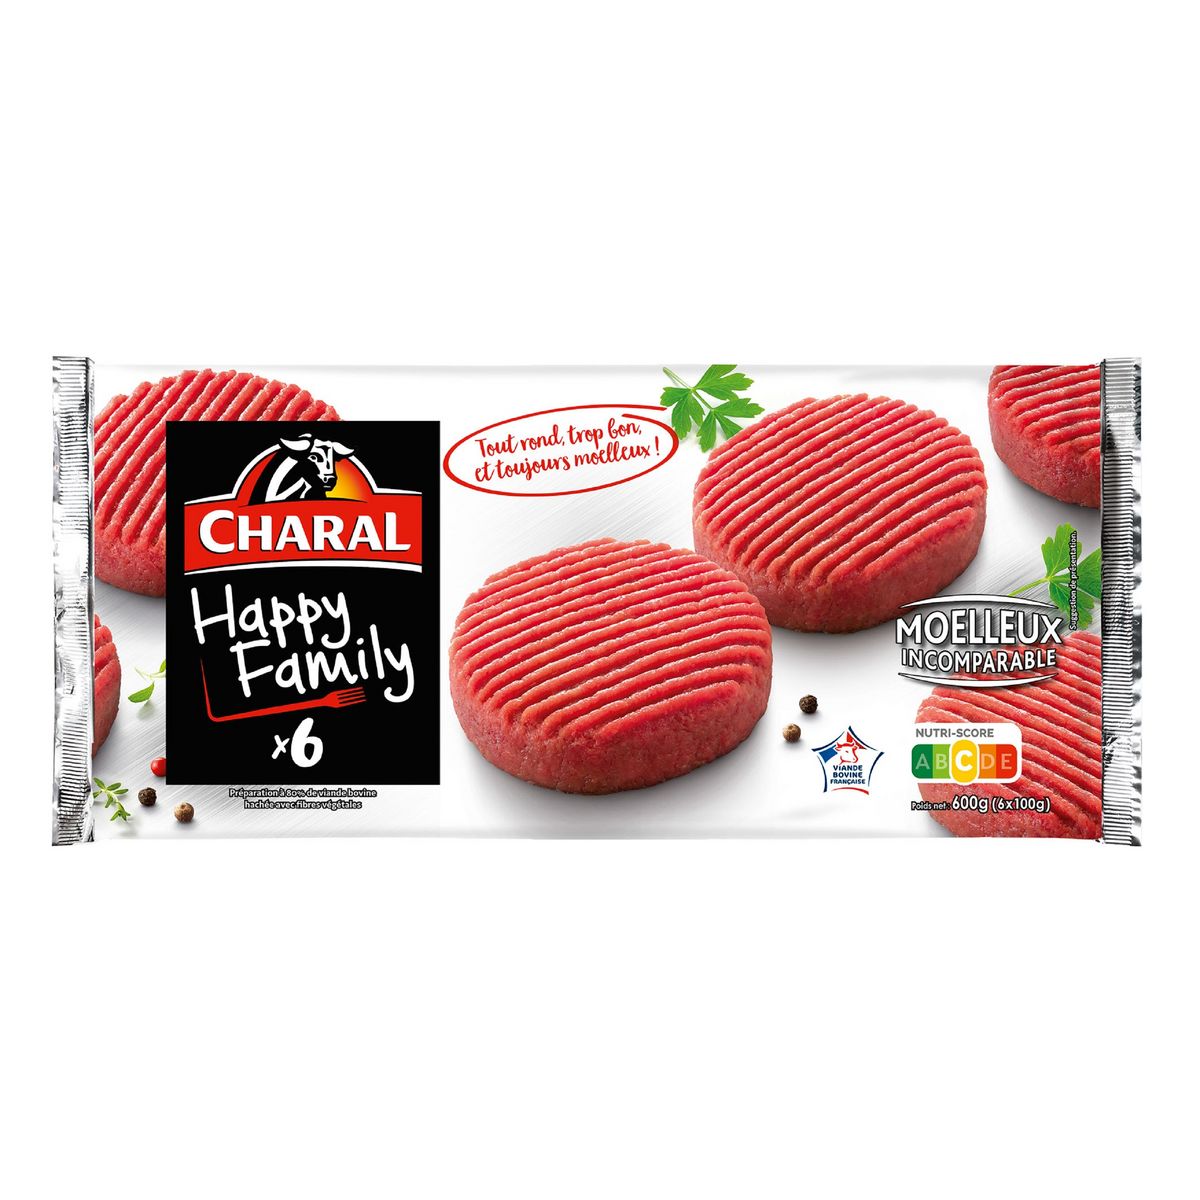 CHARAL Hachés happy family 6 pièces 600g